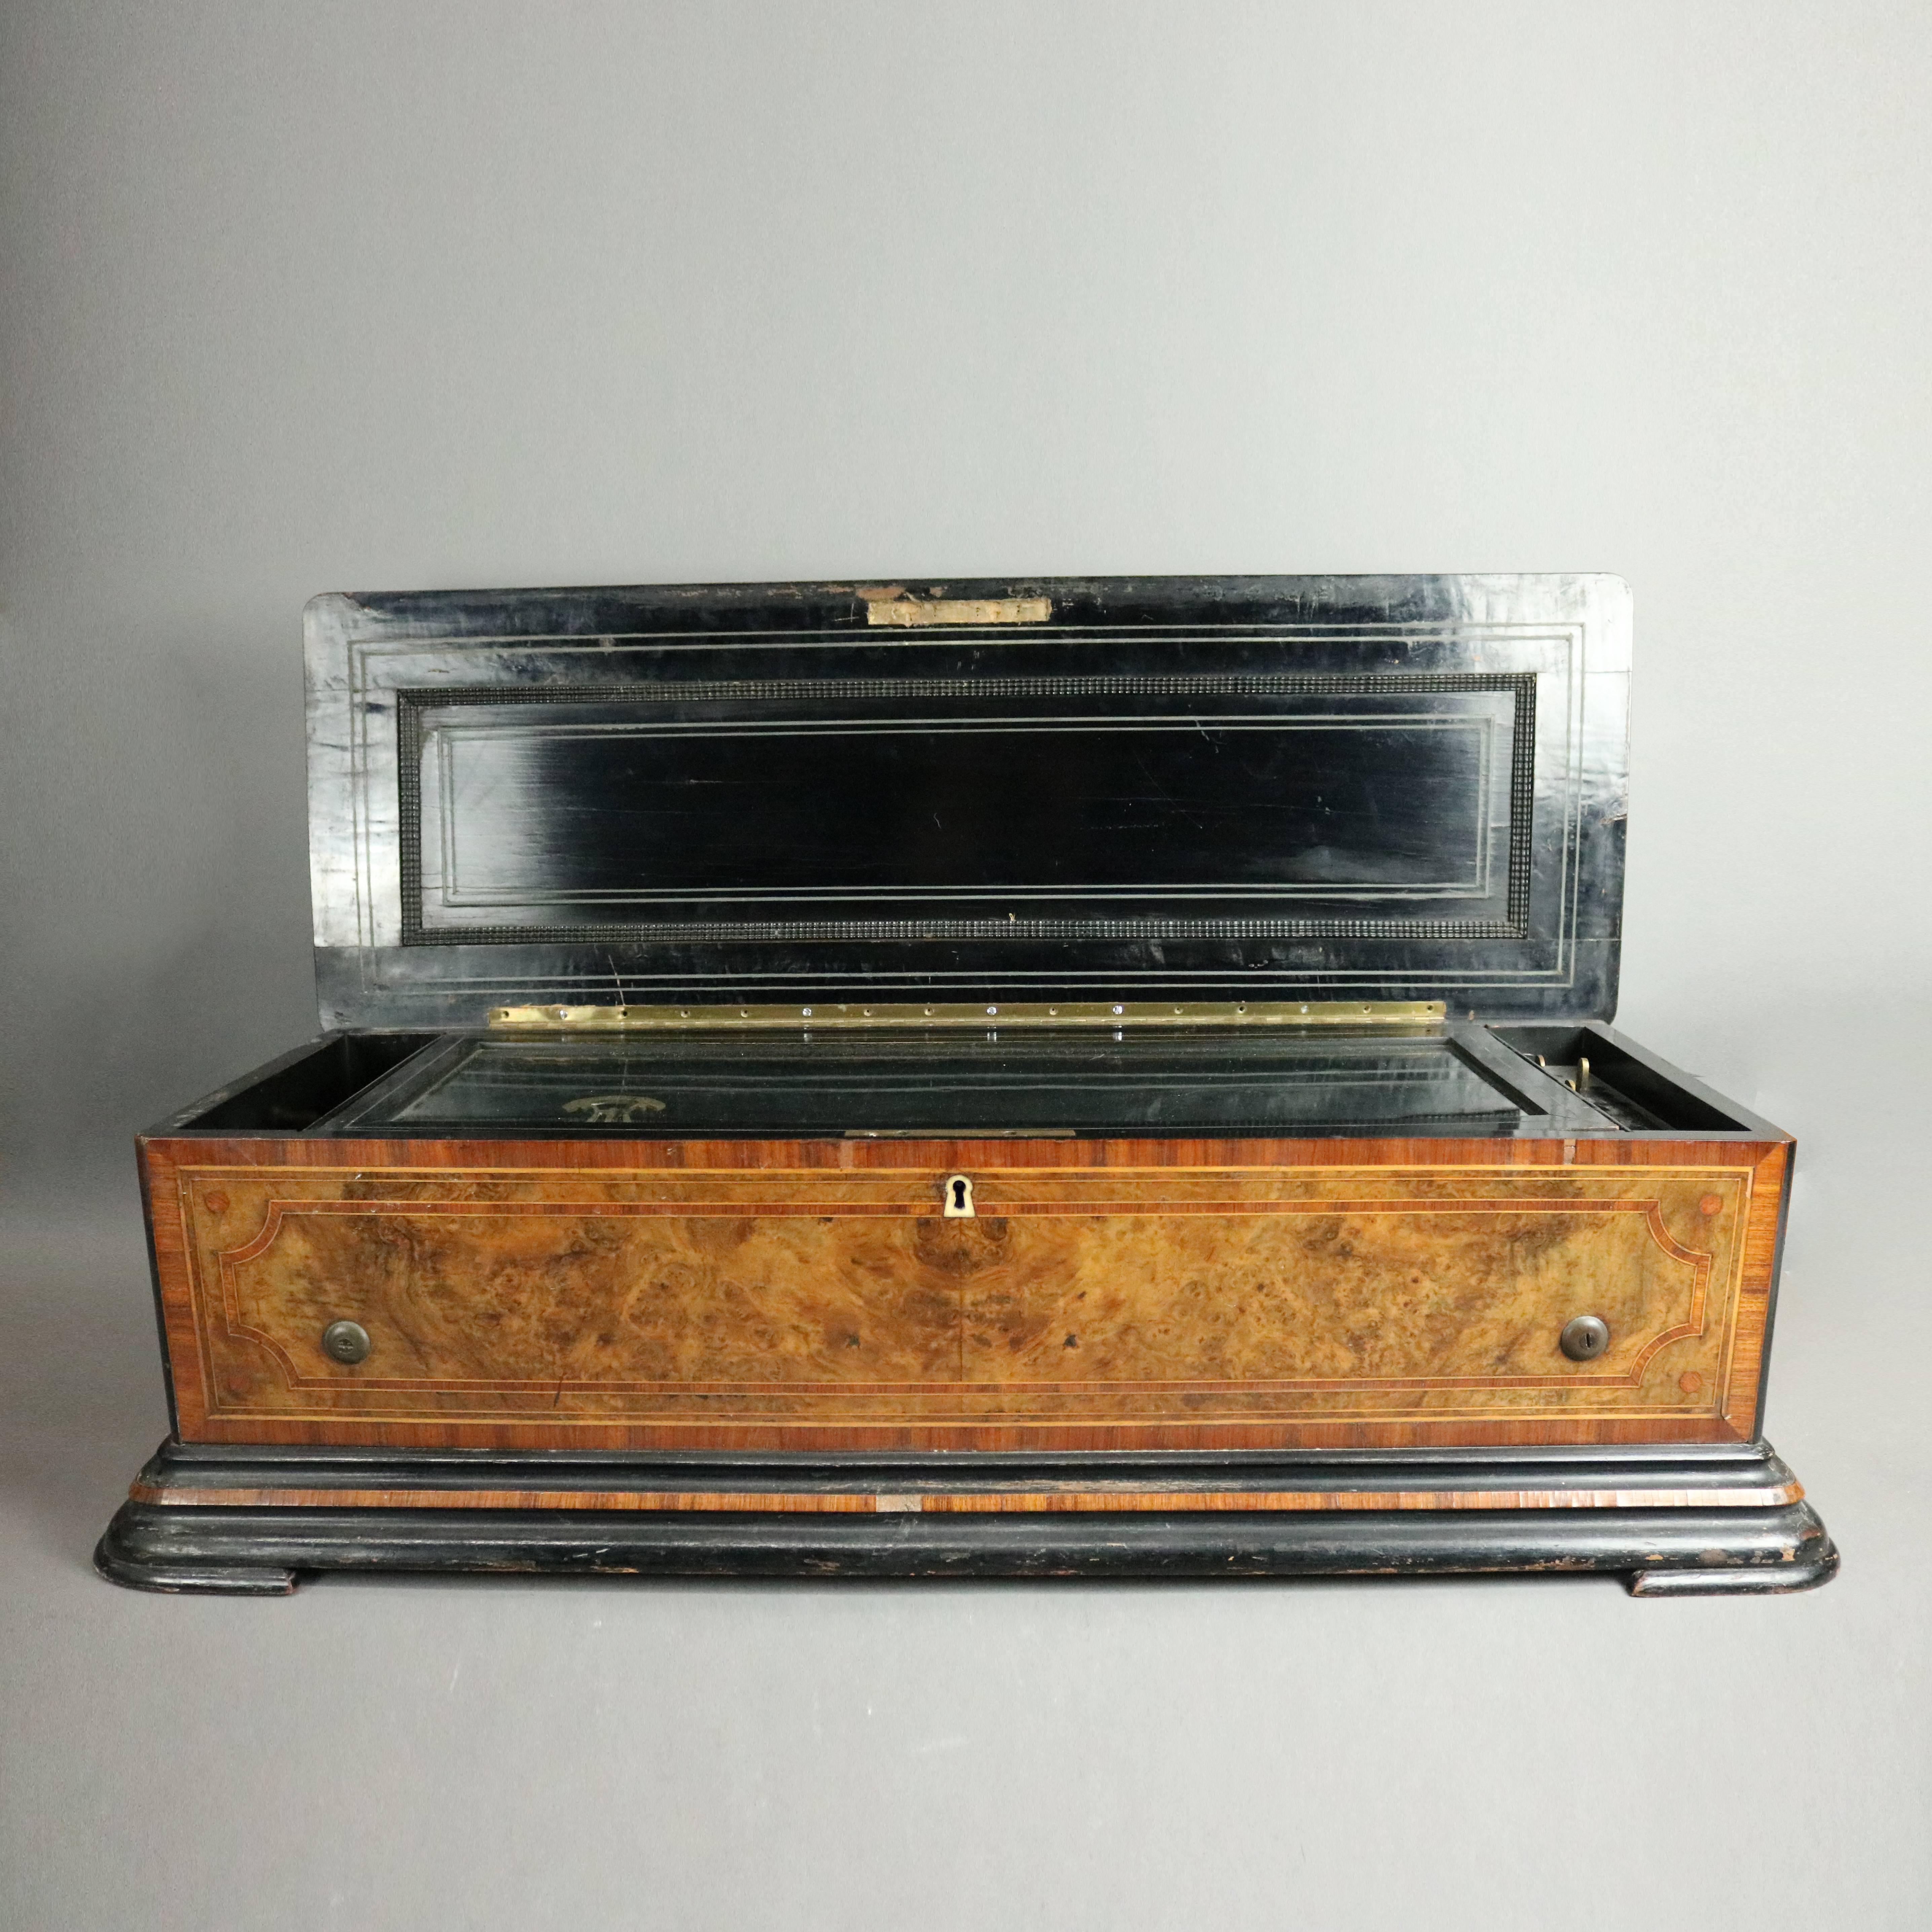 Antique Swiss cylinder music box plays twelve songs, housed in a burl mahogany case, ebonized and satinwood banded and inlaid, crank included, working condition, circa 1900

Measures - 10" H x 36" W x 12" D; 18.5" cylinder